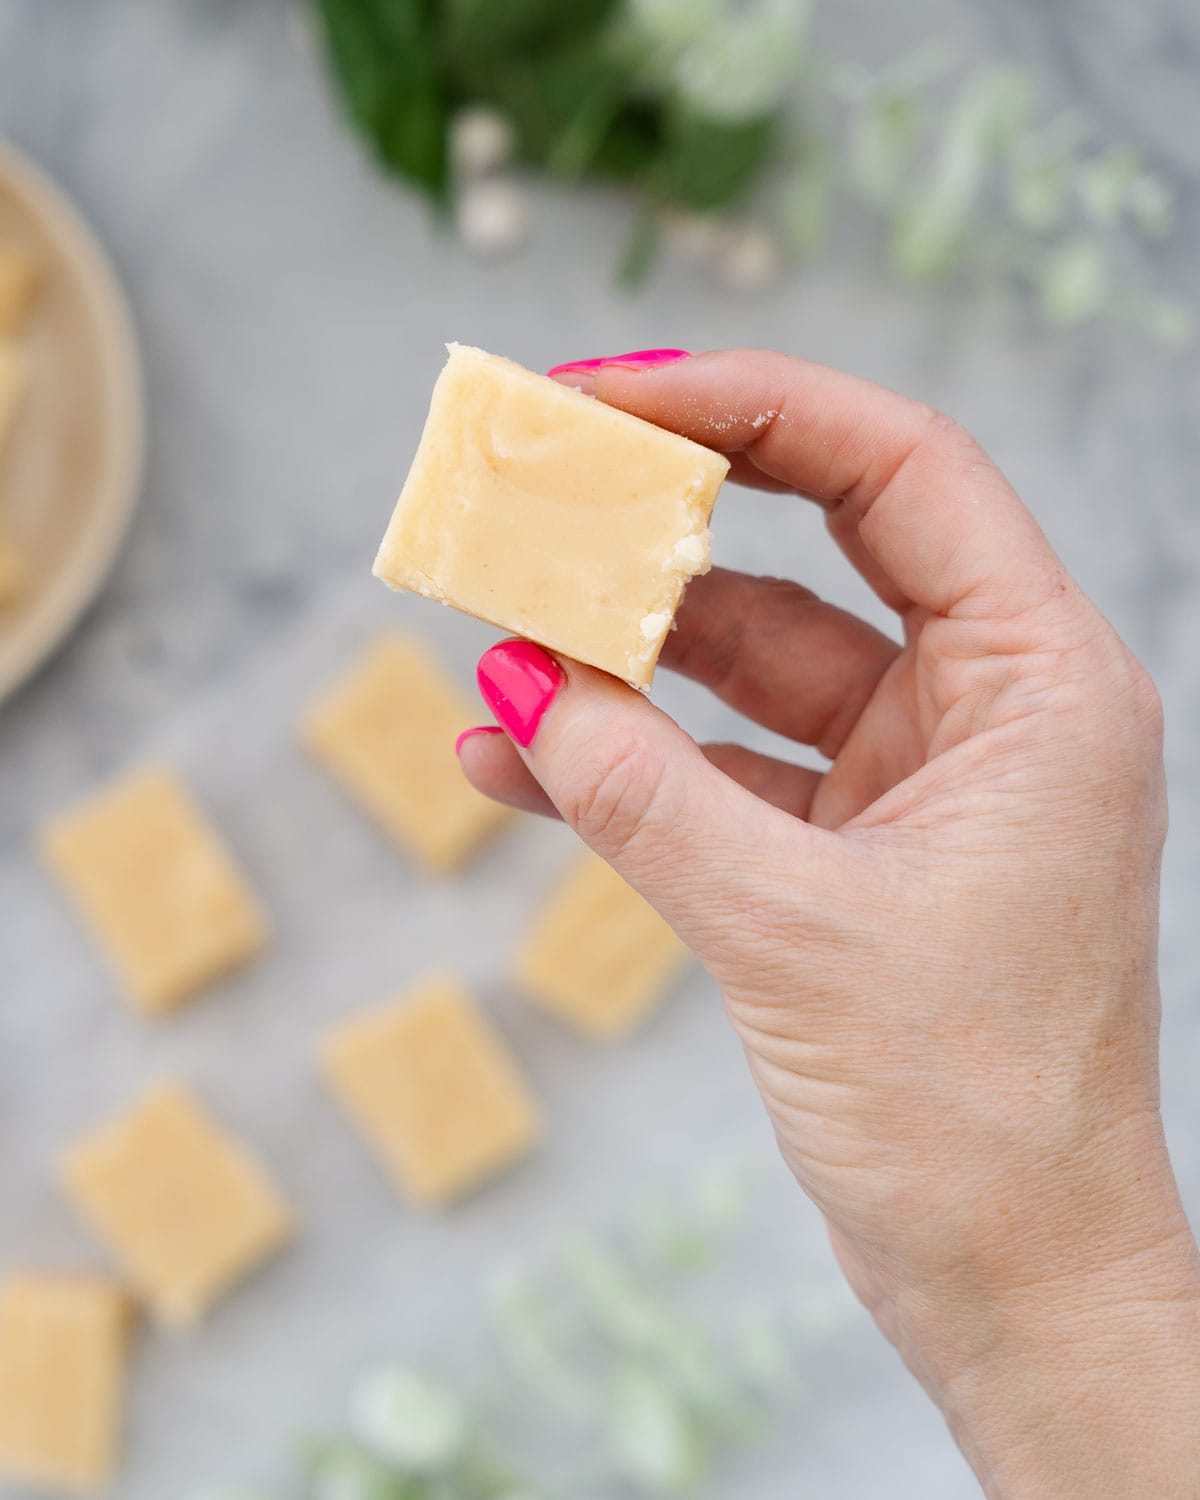 A hand with pink finger nails holding up a slice of vanilla fudge above the sliced batch below